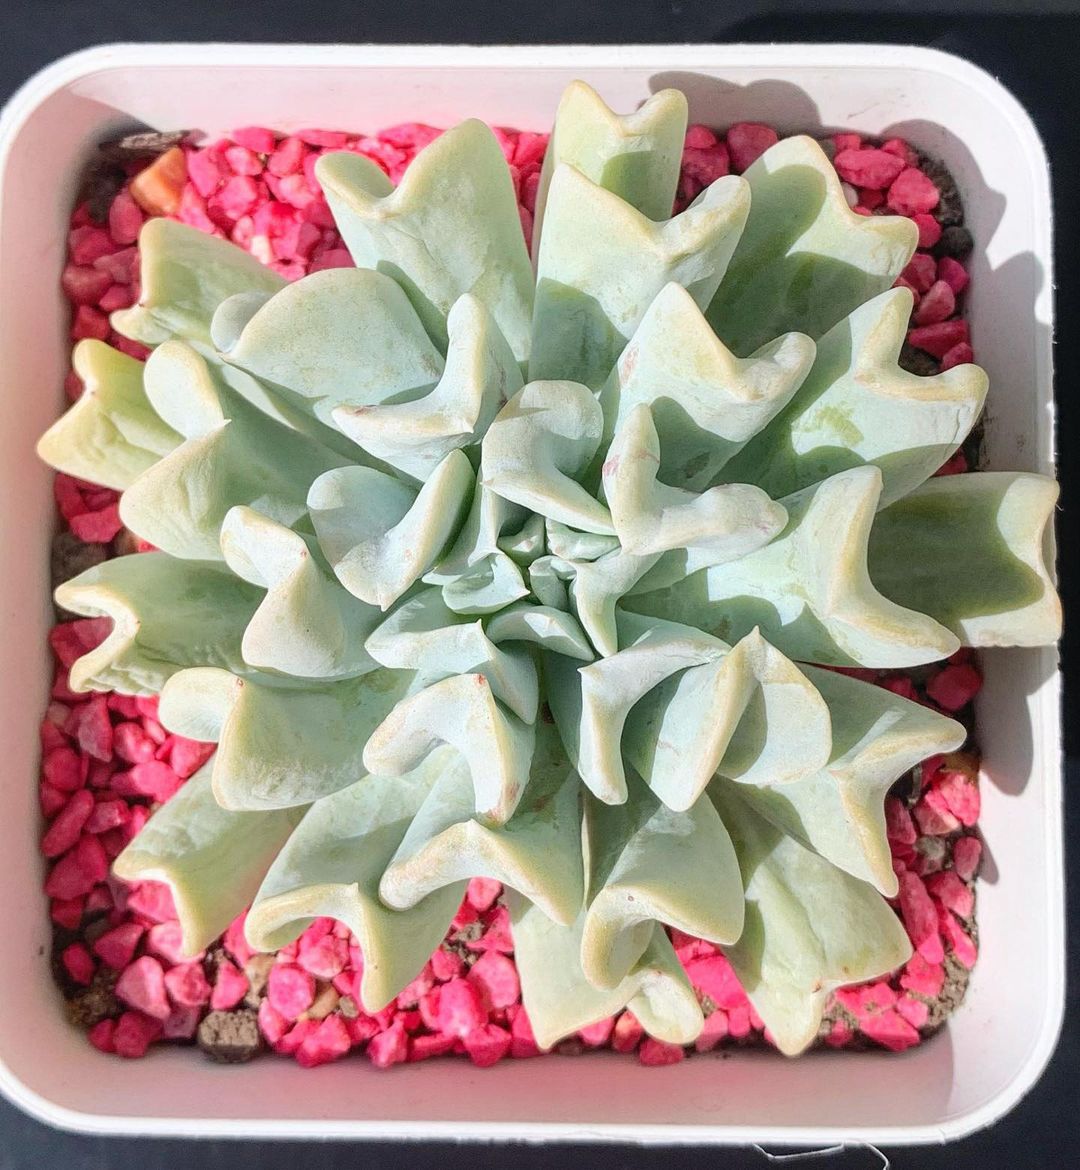 Echeveria Runyonii: The Beautiful Succulent With Pinkish Hues